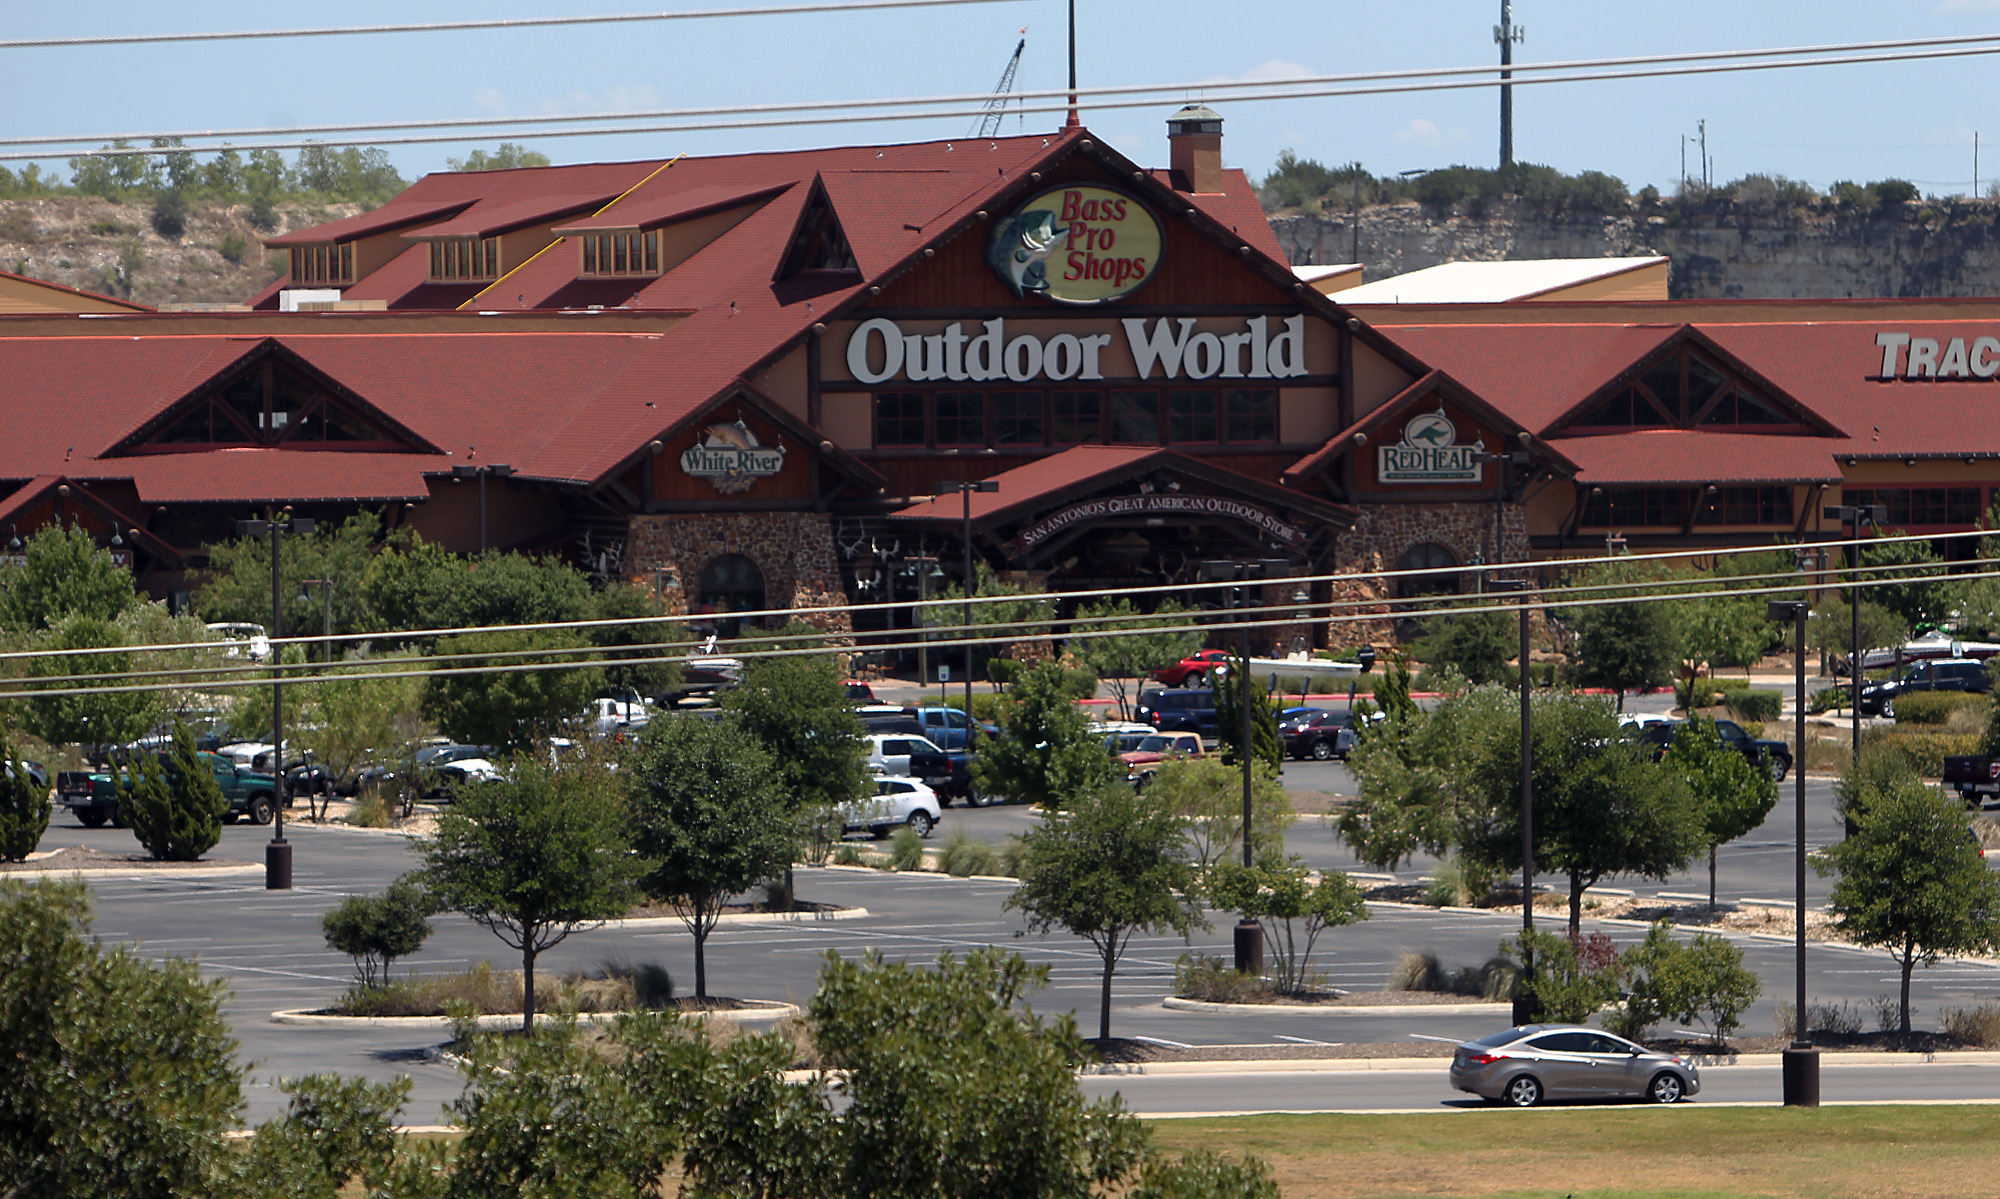 Tract with Bass Pro property is auctioned for $4.2 million